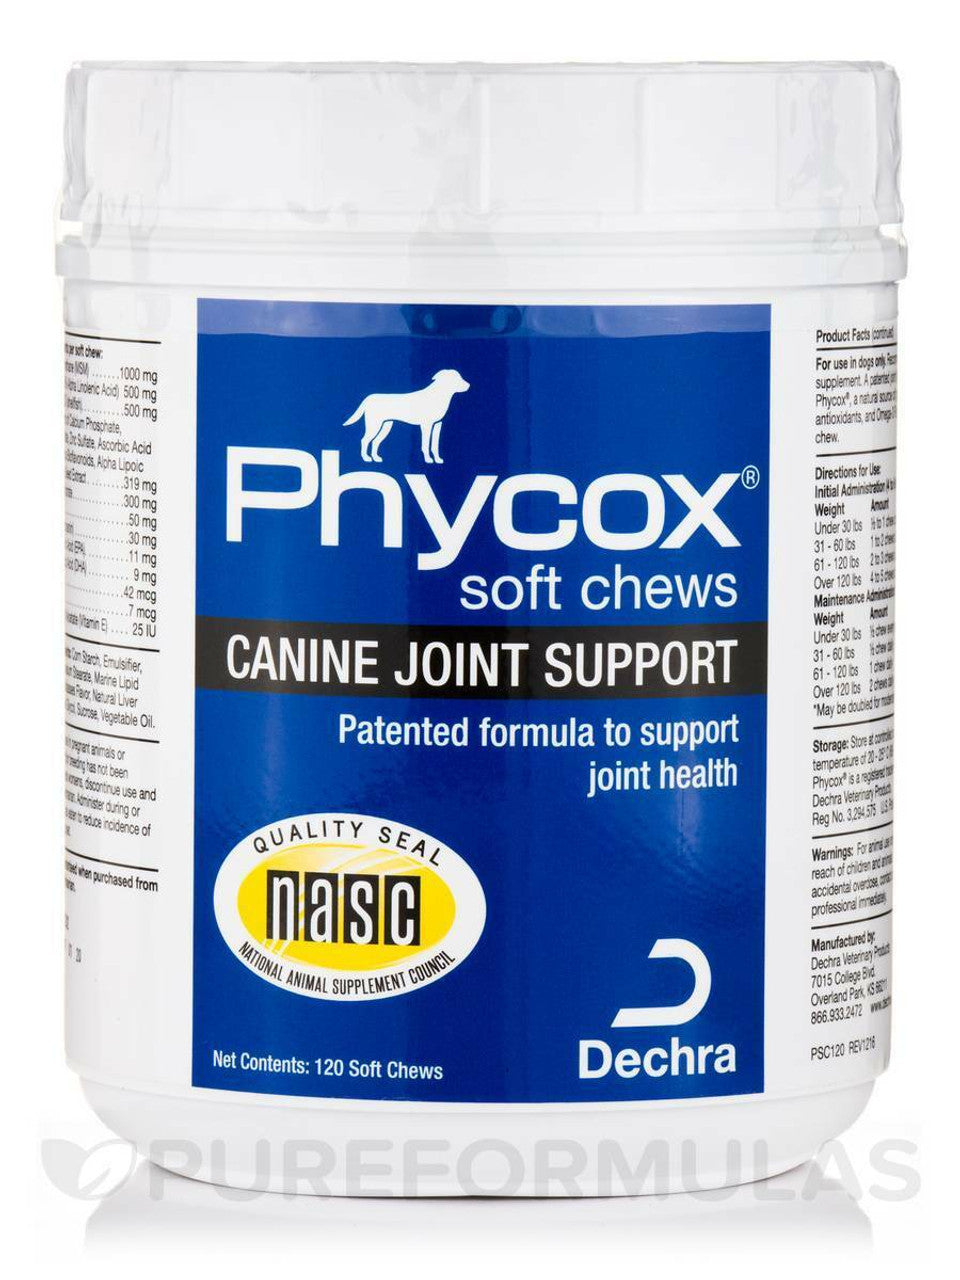 Phycox Soft Chews Canine Joint Supplement